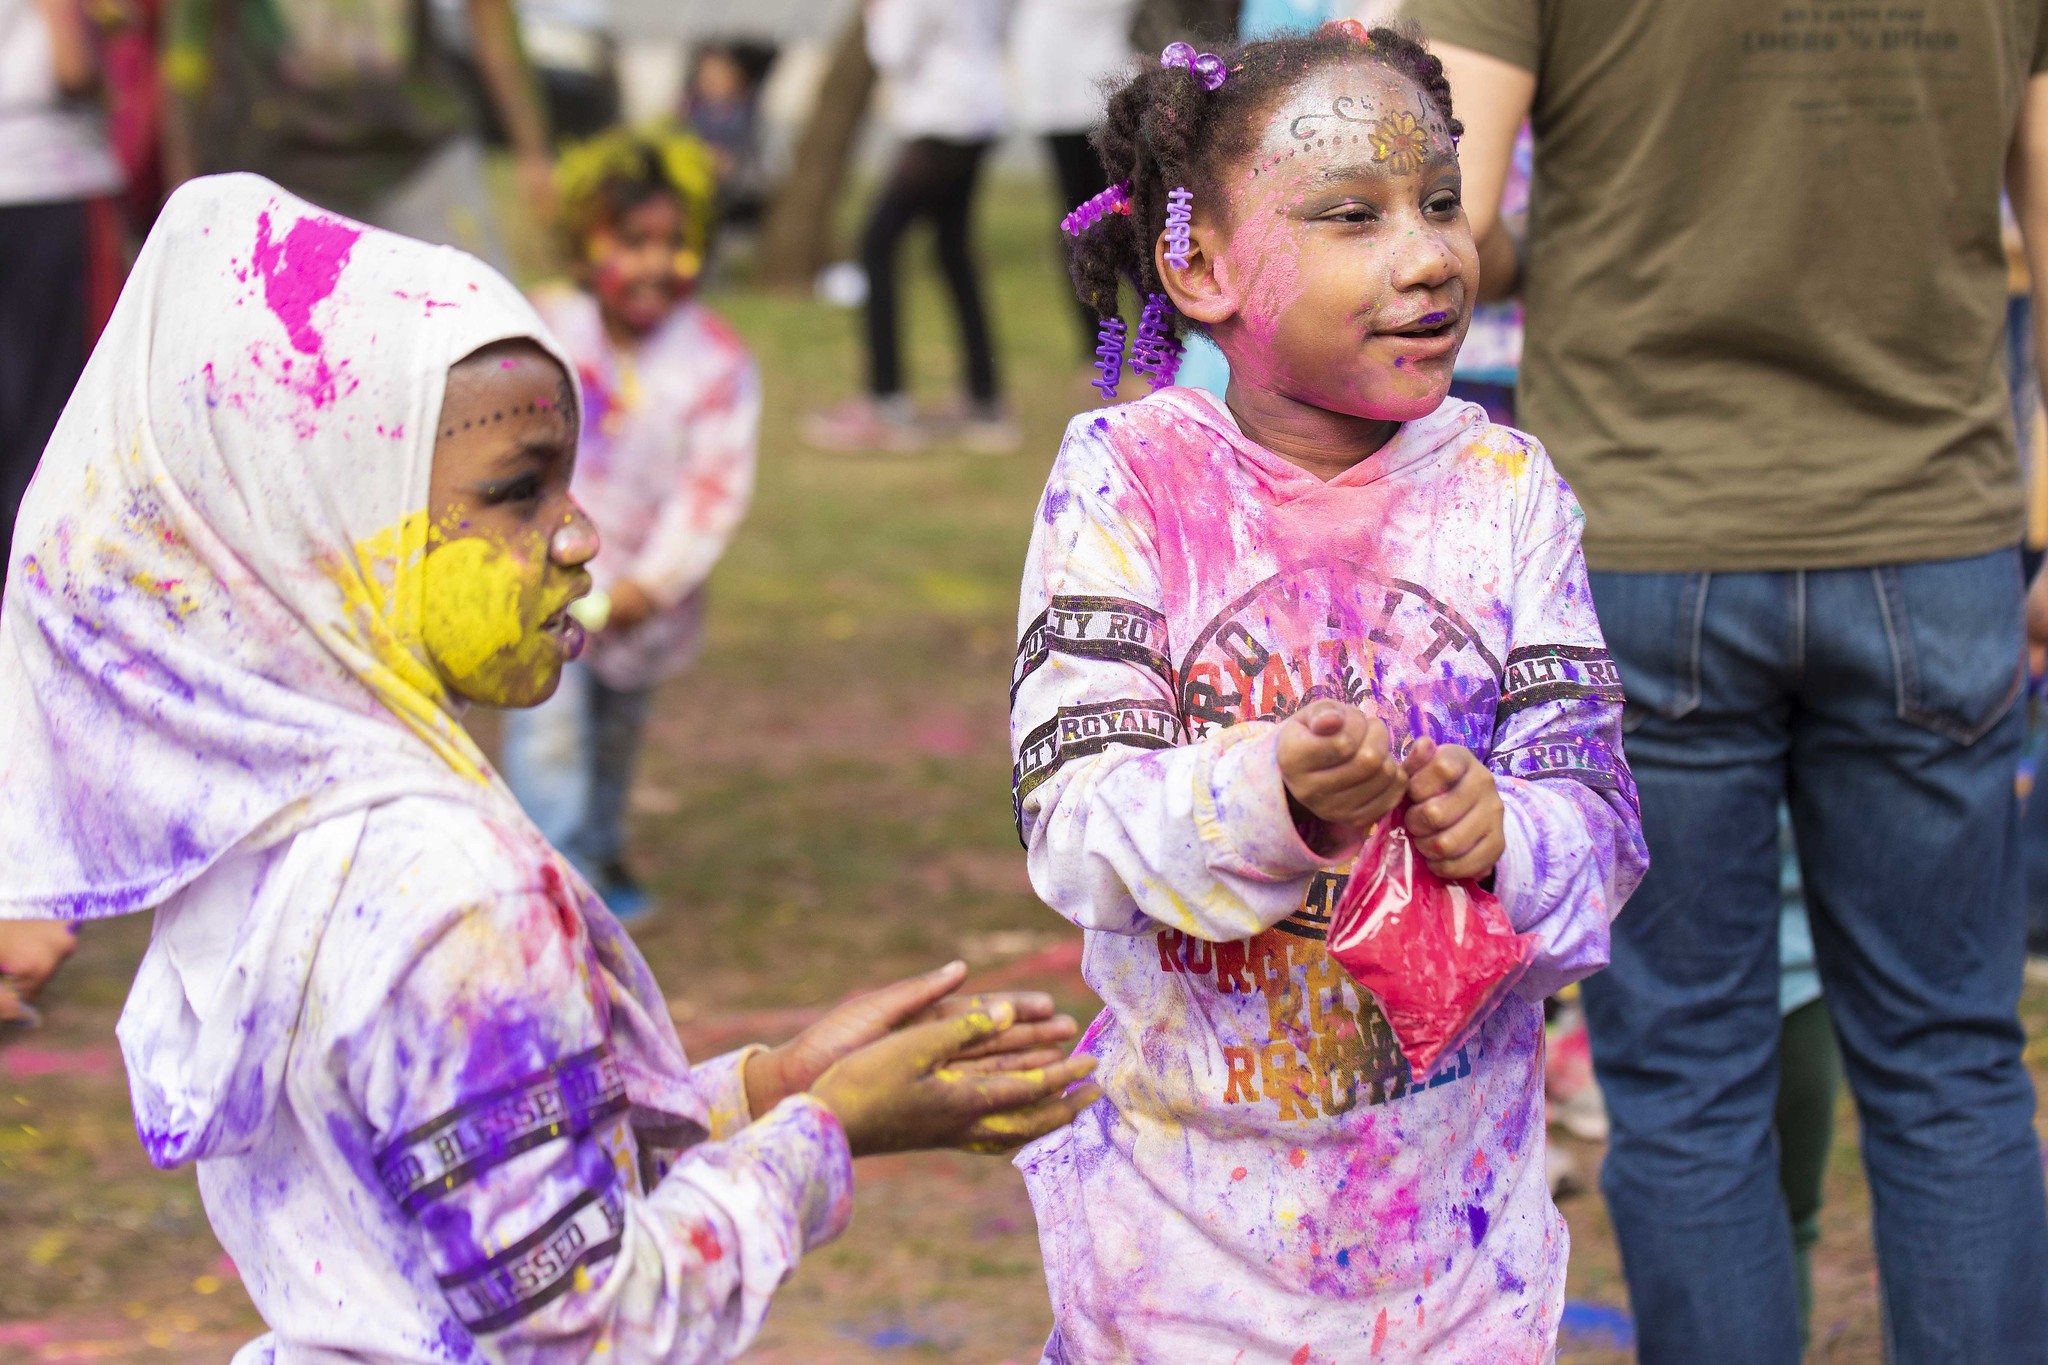 The Indian Holi Festival is an annual spring staple that many of our library patrons and community members across New Jersey celebrate.